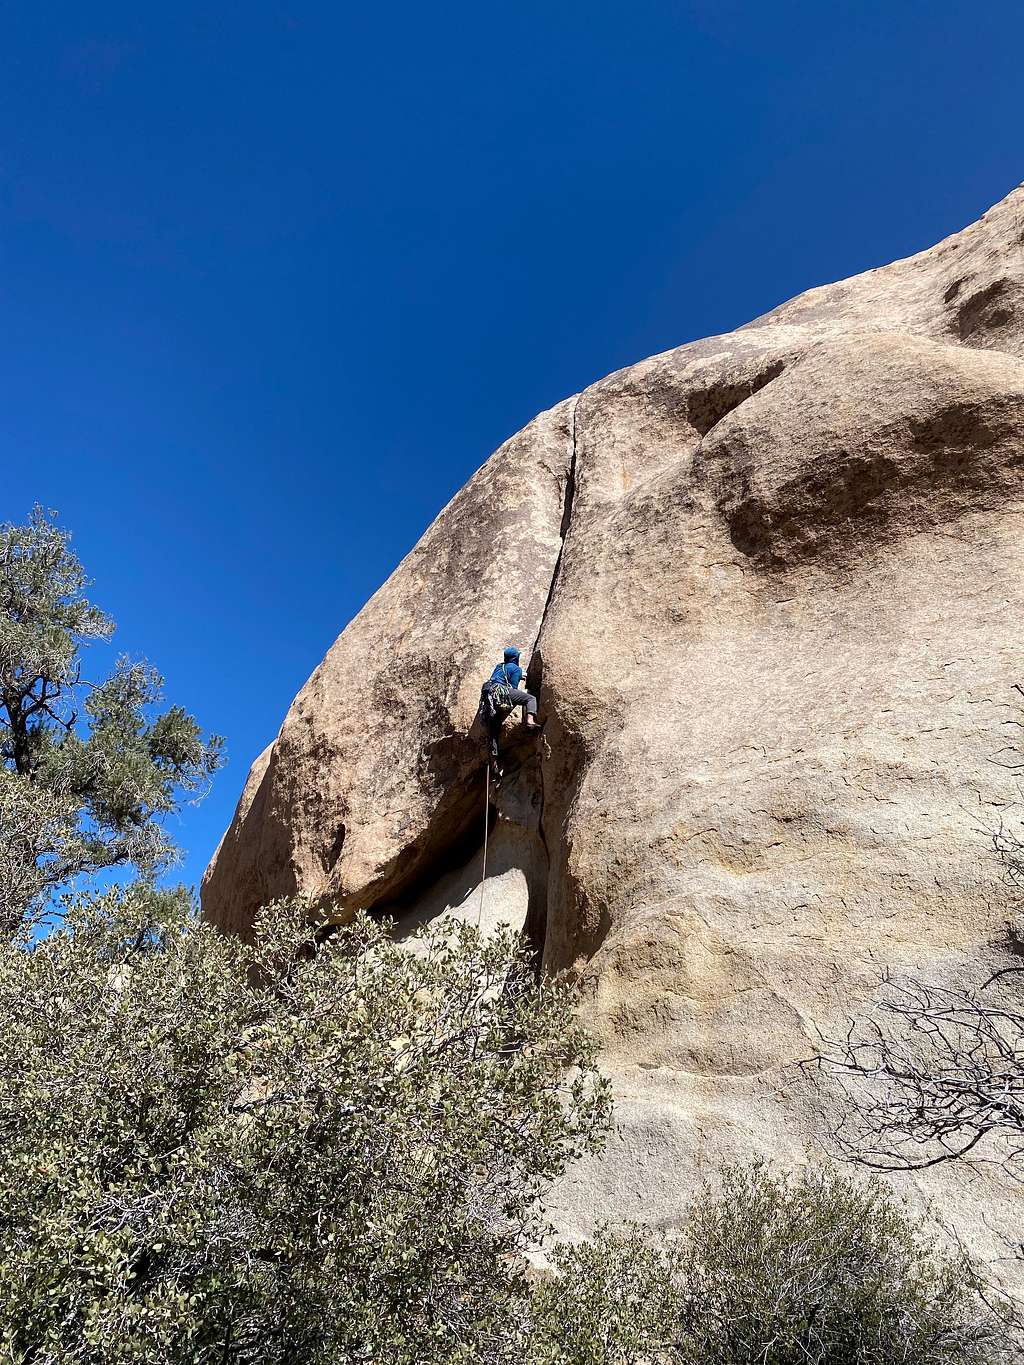 Insolvent, 5.10b